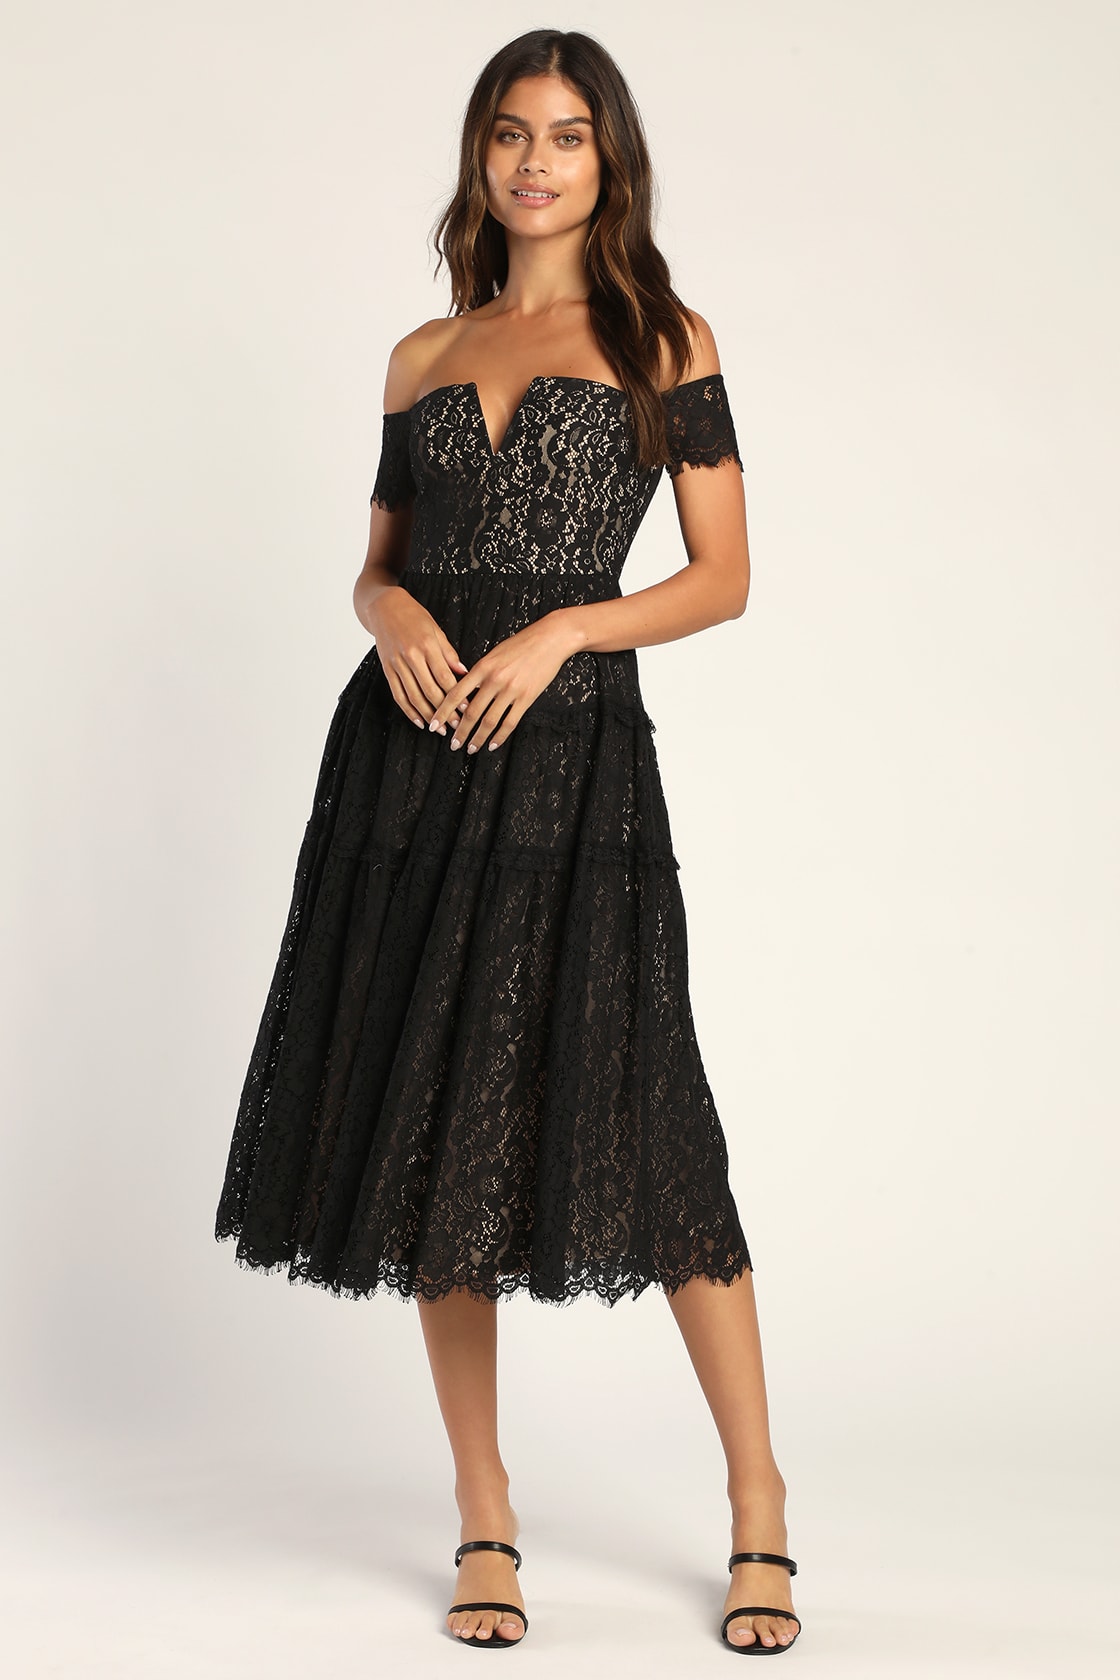 Absolutely Stunning Black Lace Off-the-Shoulder Midi Dress